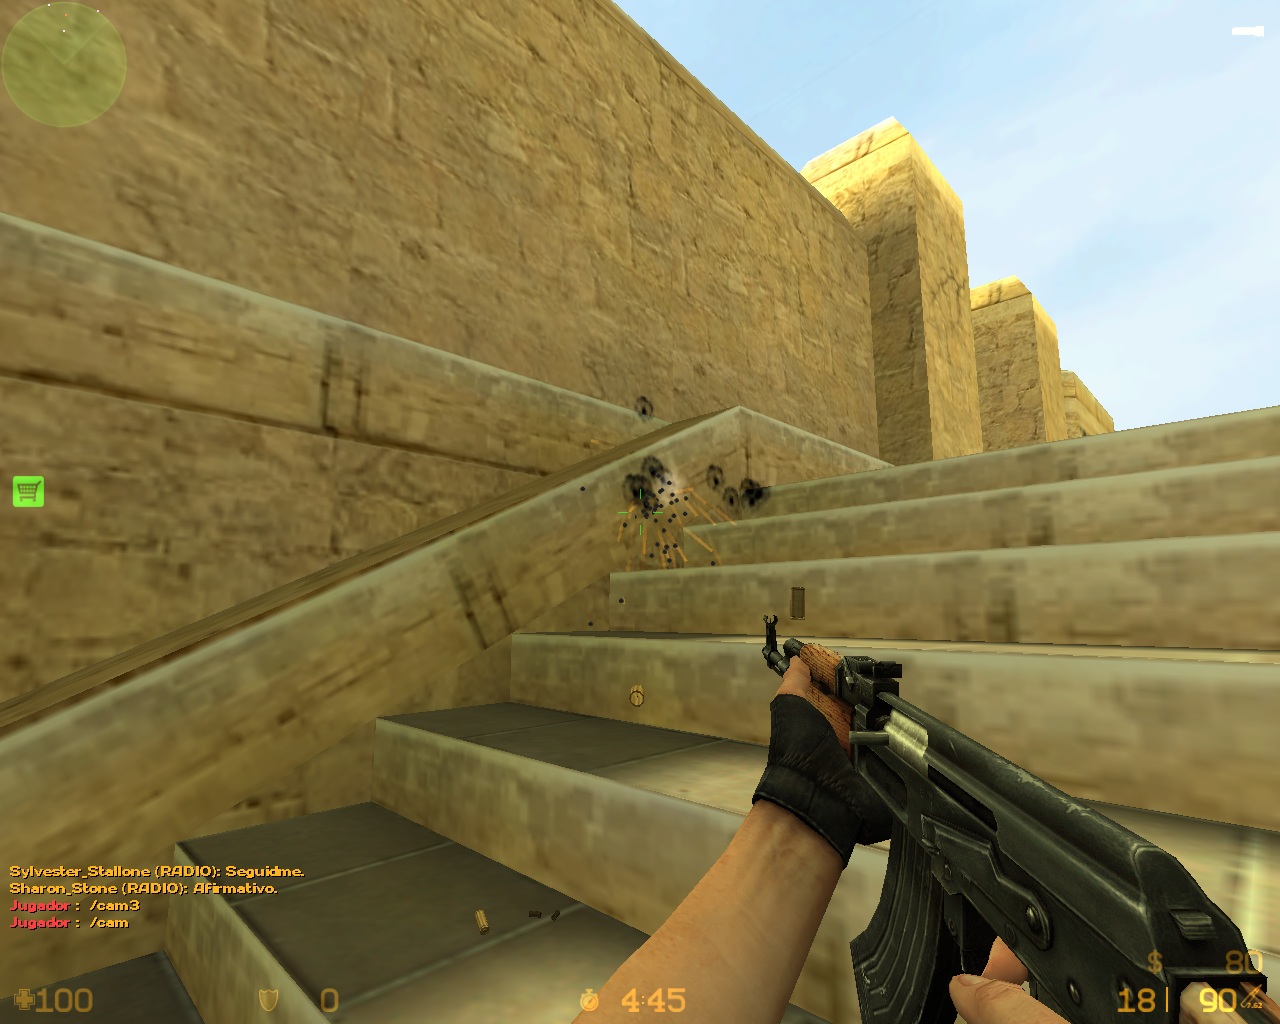 counter strike notes